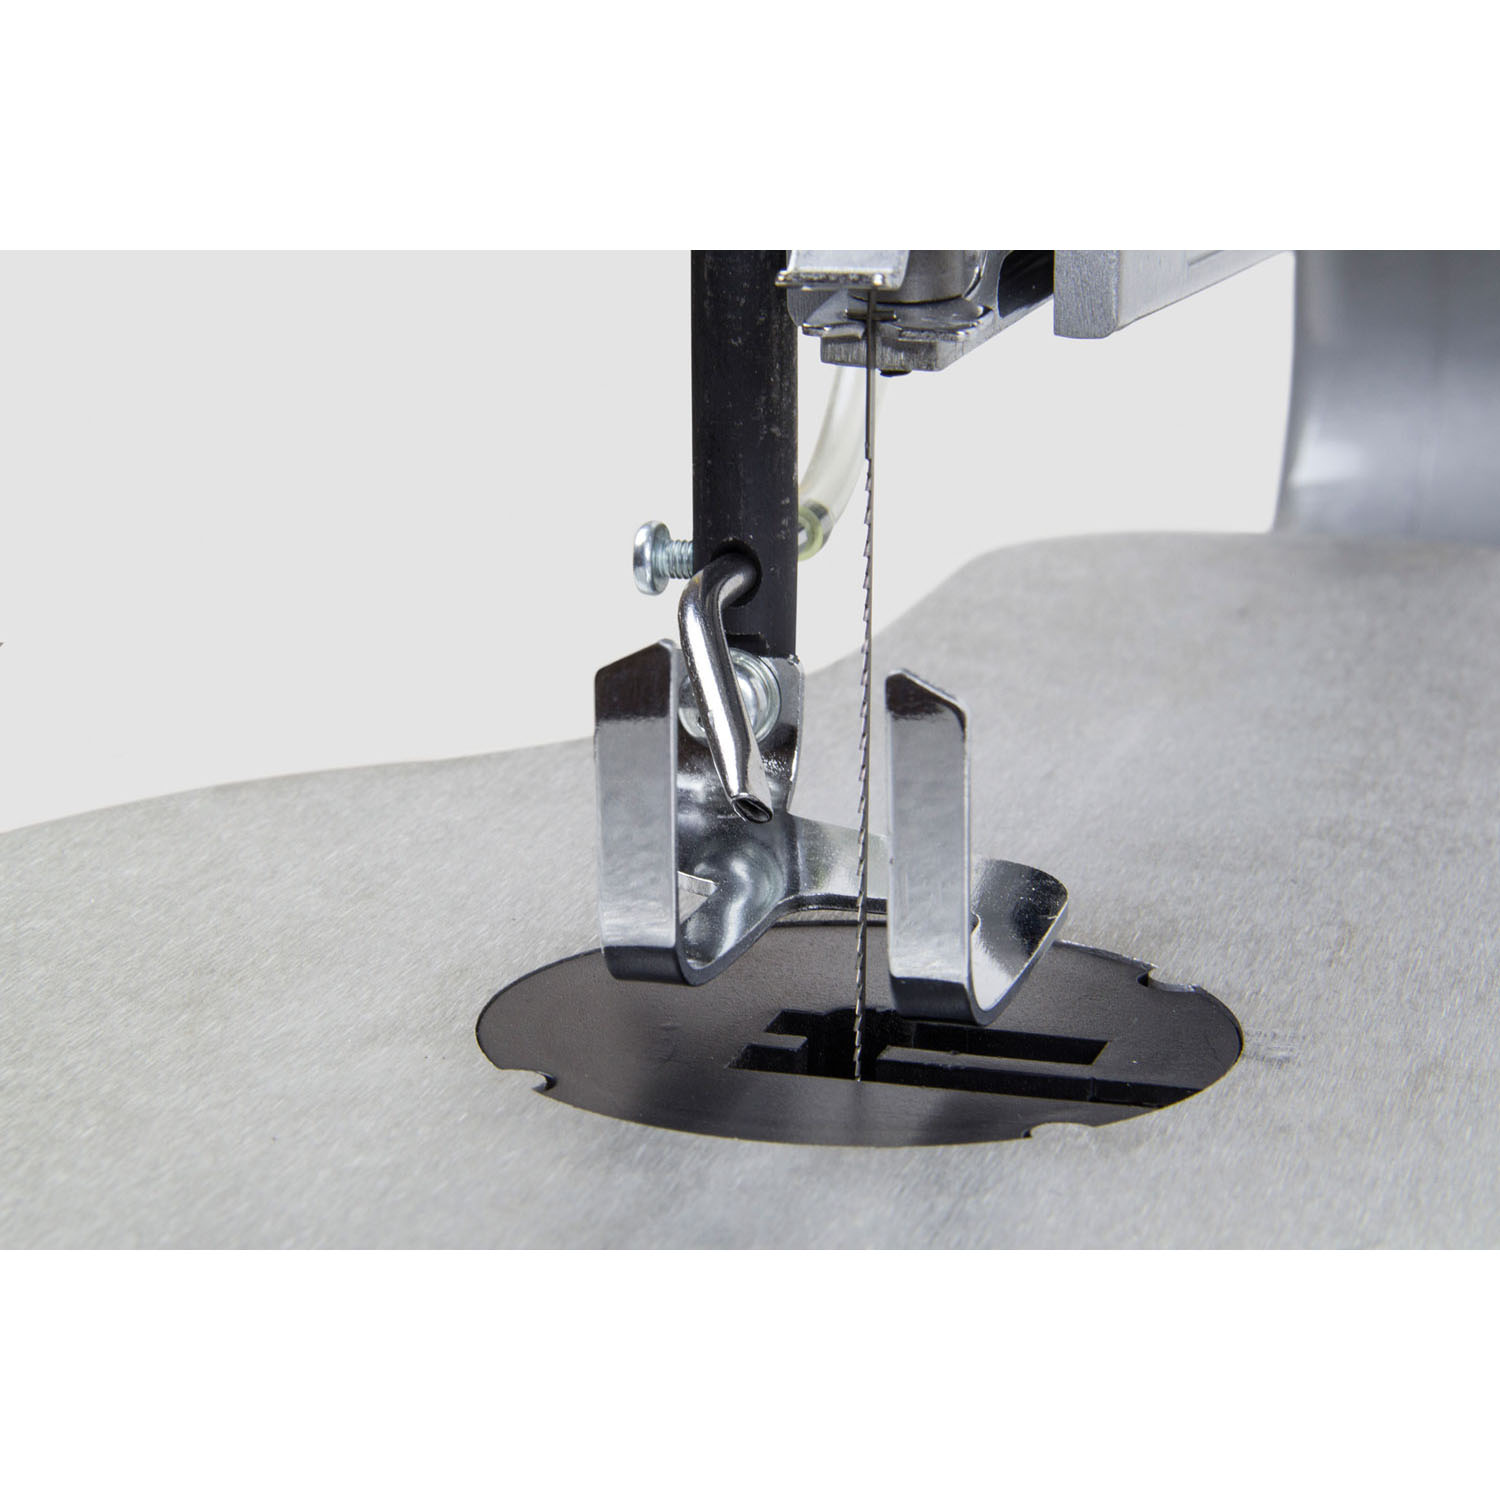 SIP 16" Flexi-Drive Scroll Saw 01947 | Integrated NVR switch